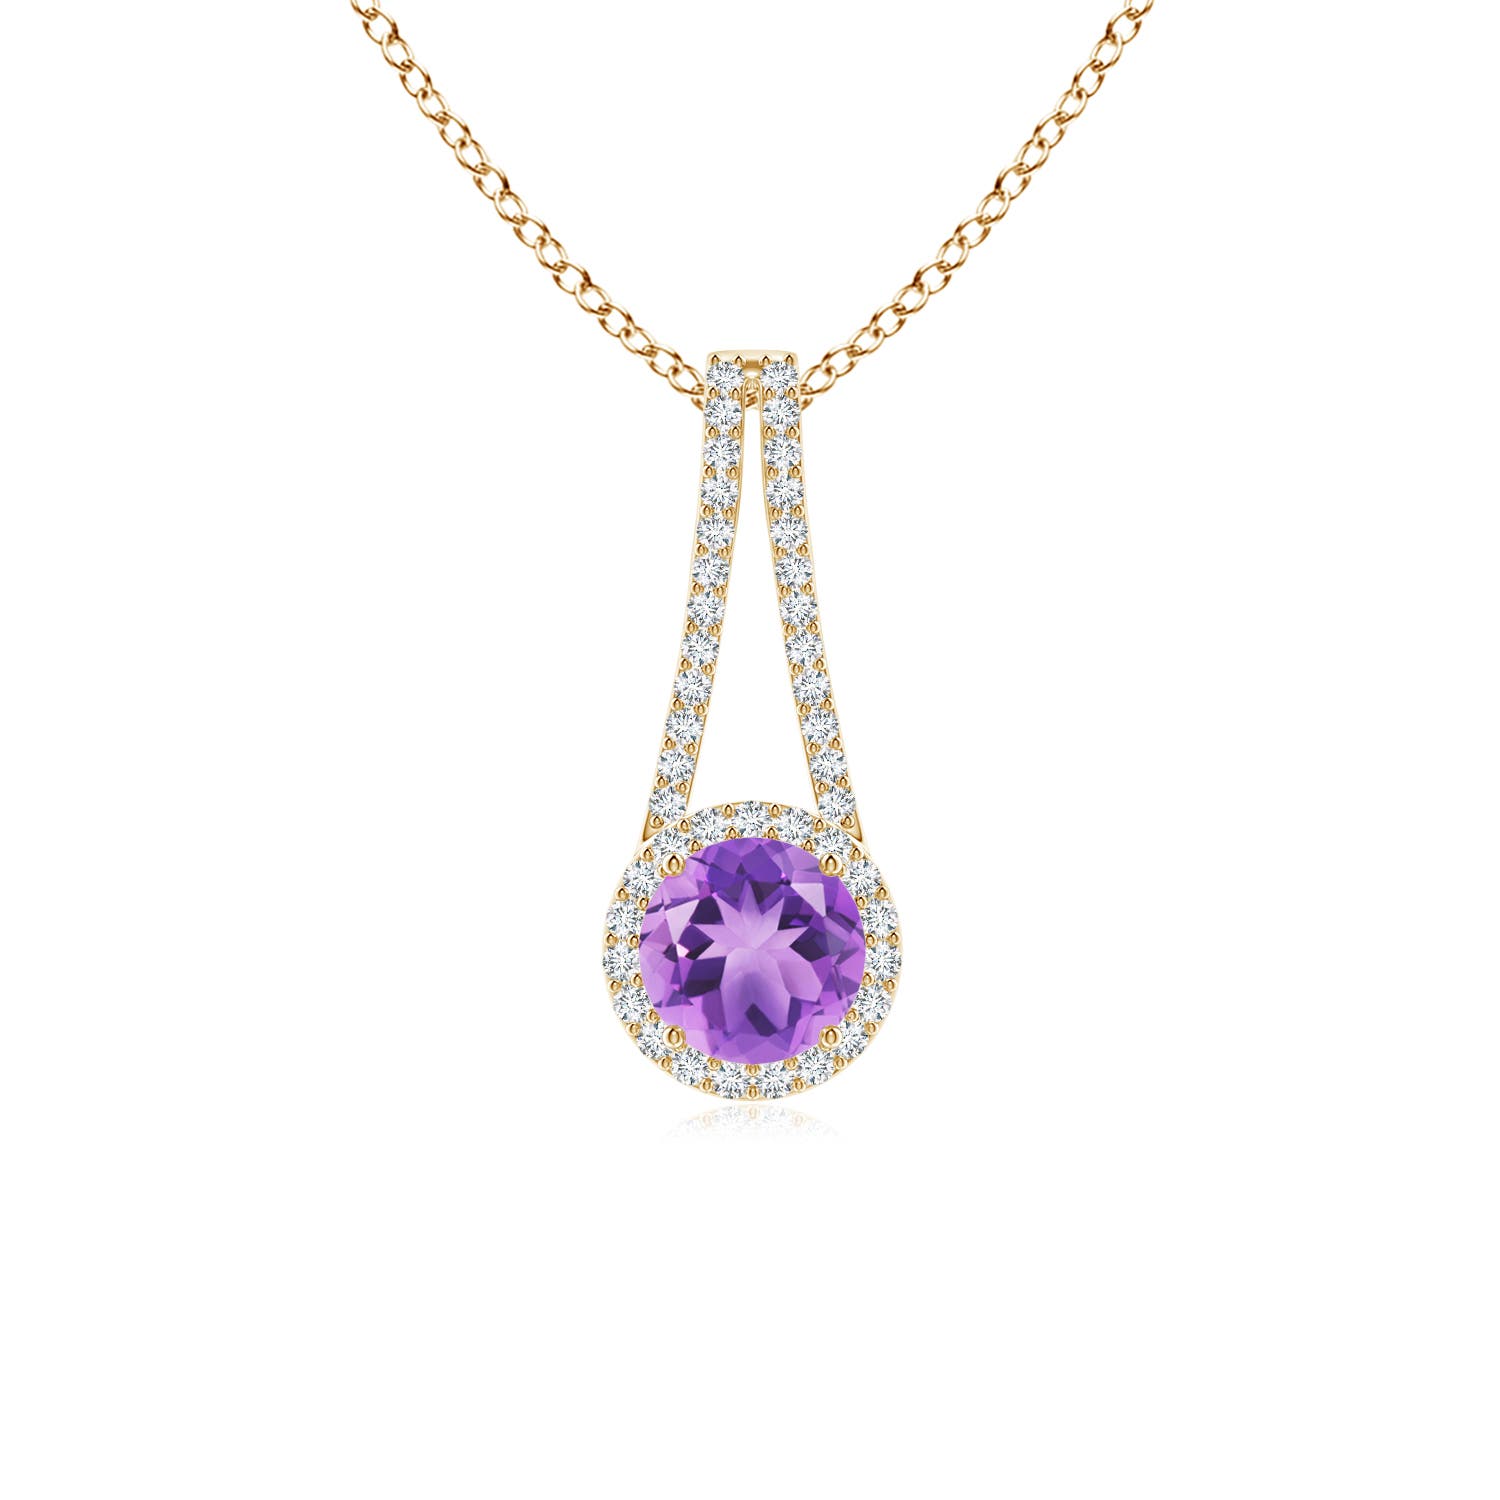 A - Amethyst / 1.02 CT / 14 KT Yellow Gold